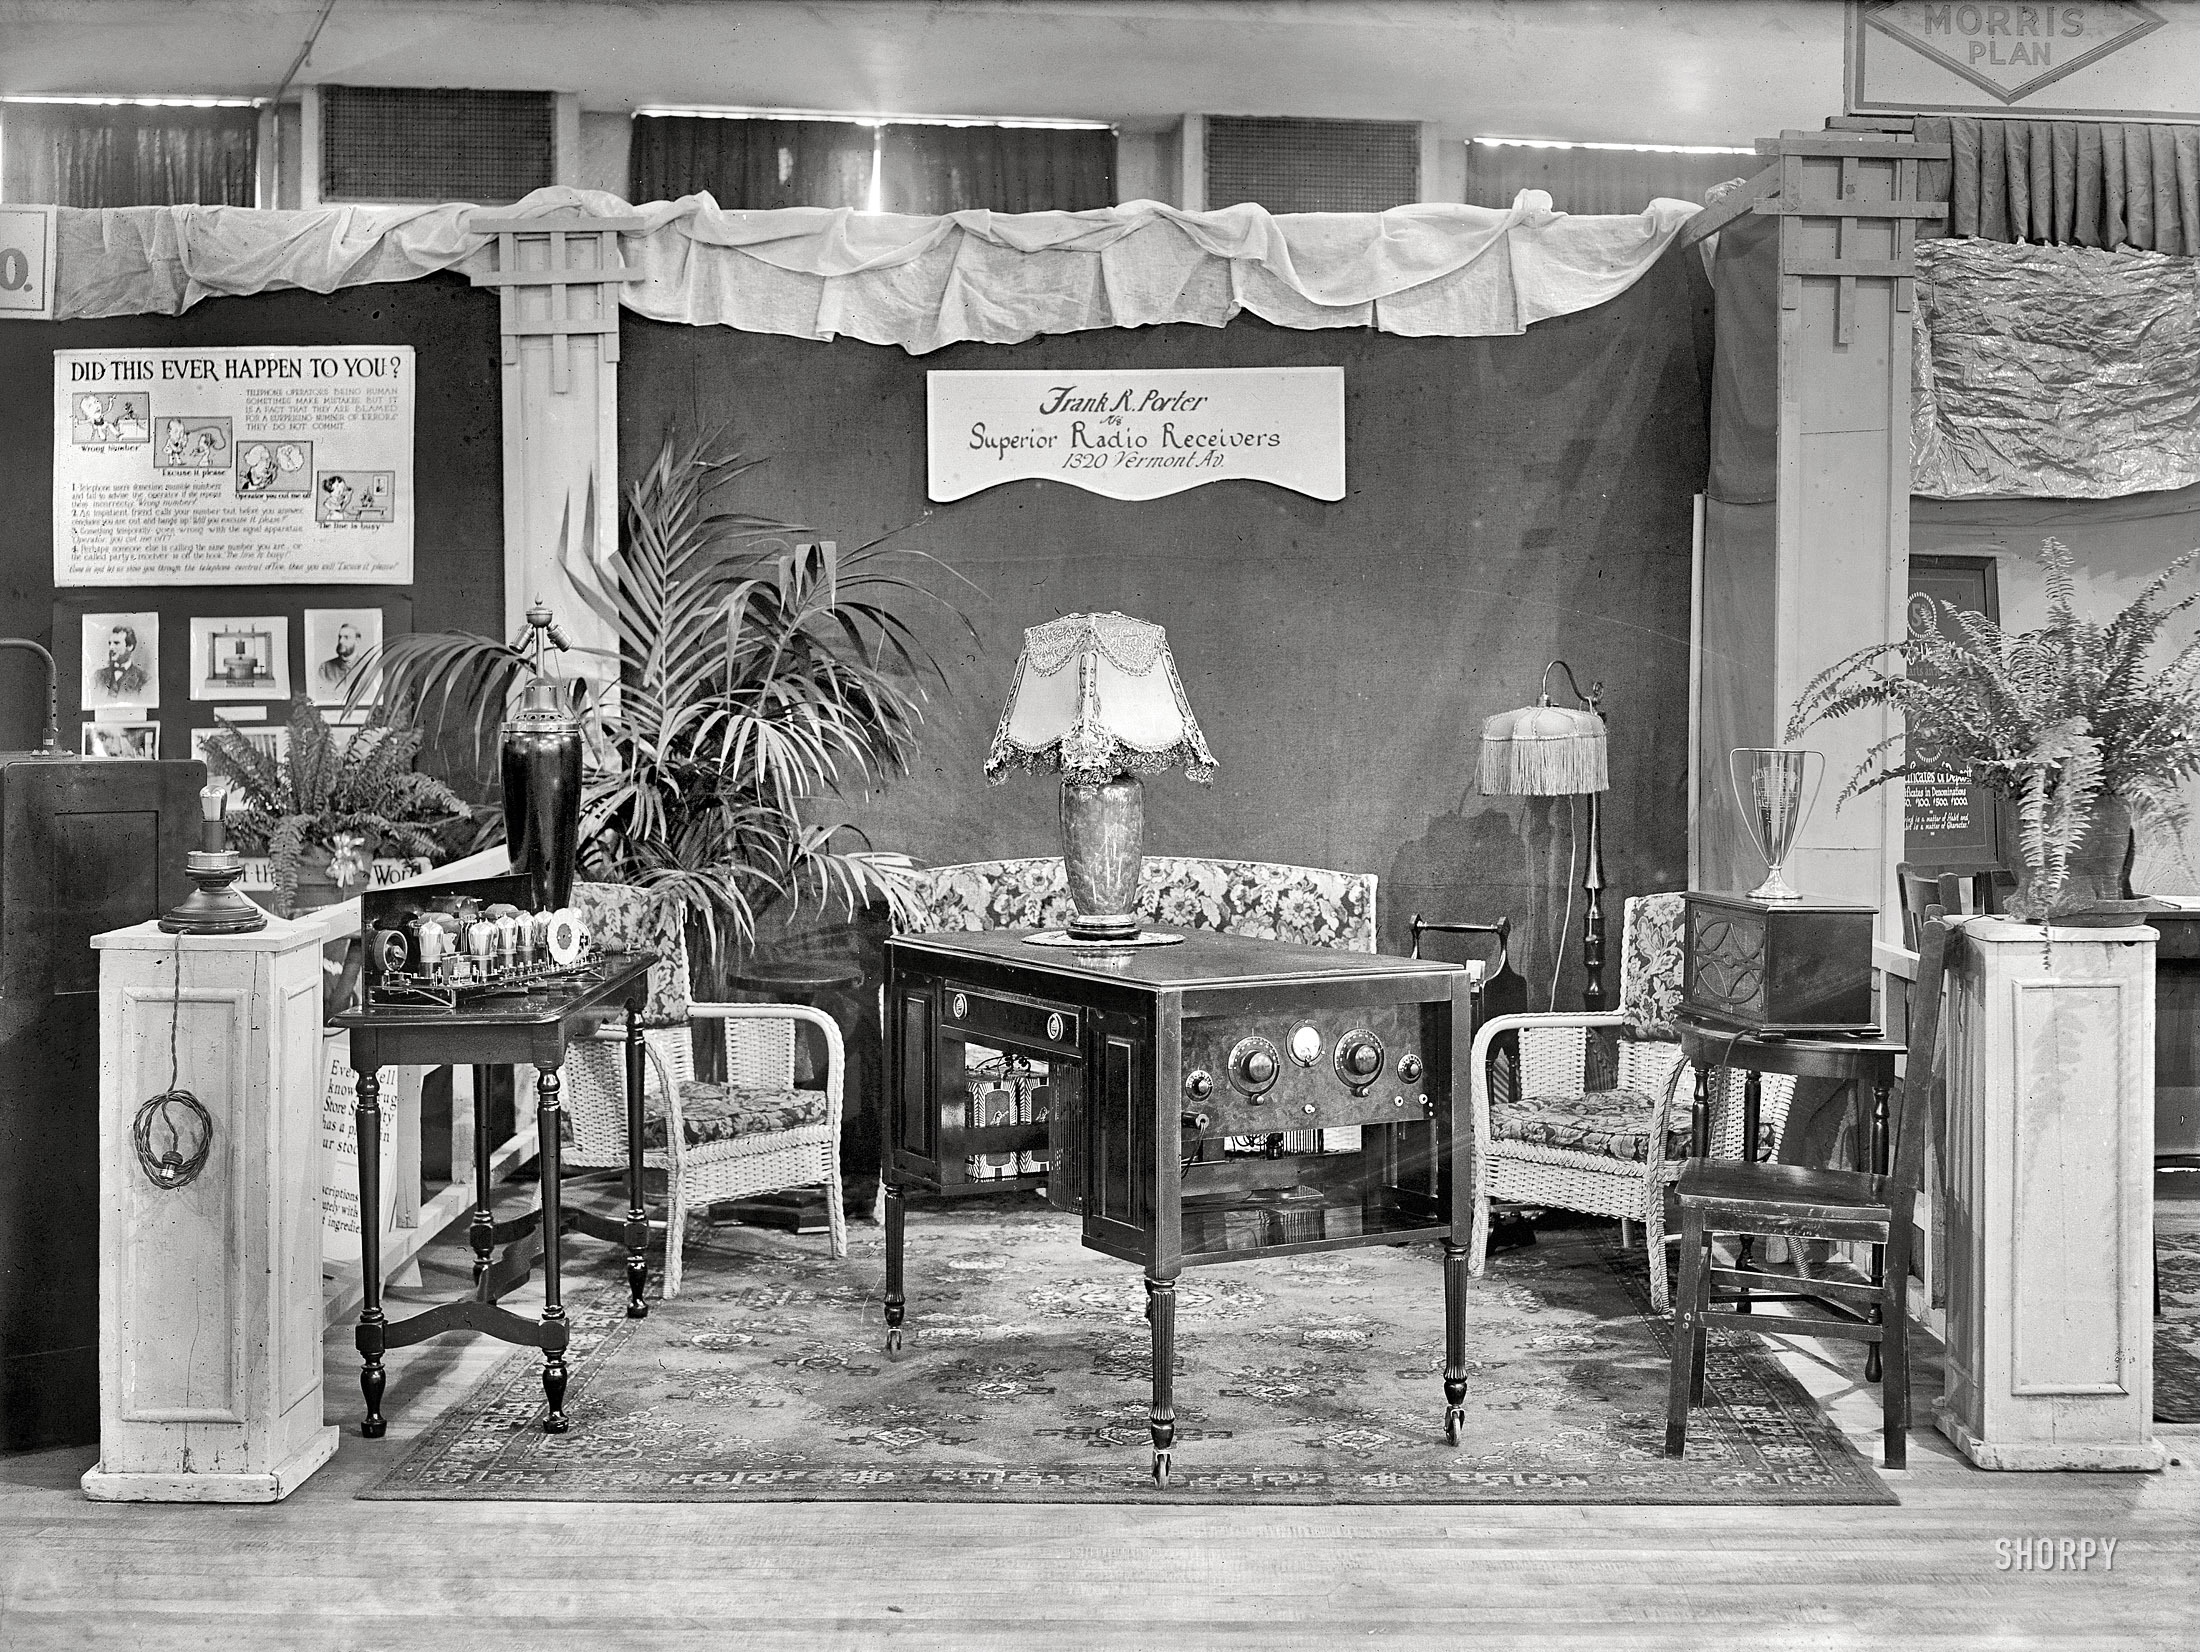 Washington, D.C., 1926. "Industrial Exposition. Frank R. Porter -- booth at auditorium." With neighboring displays on telephone etiquette and the Morris Plan Bank. National Photo Company Collection glass negative. View full size.